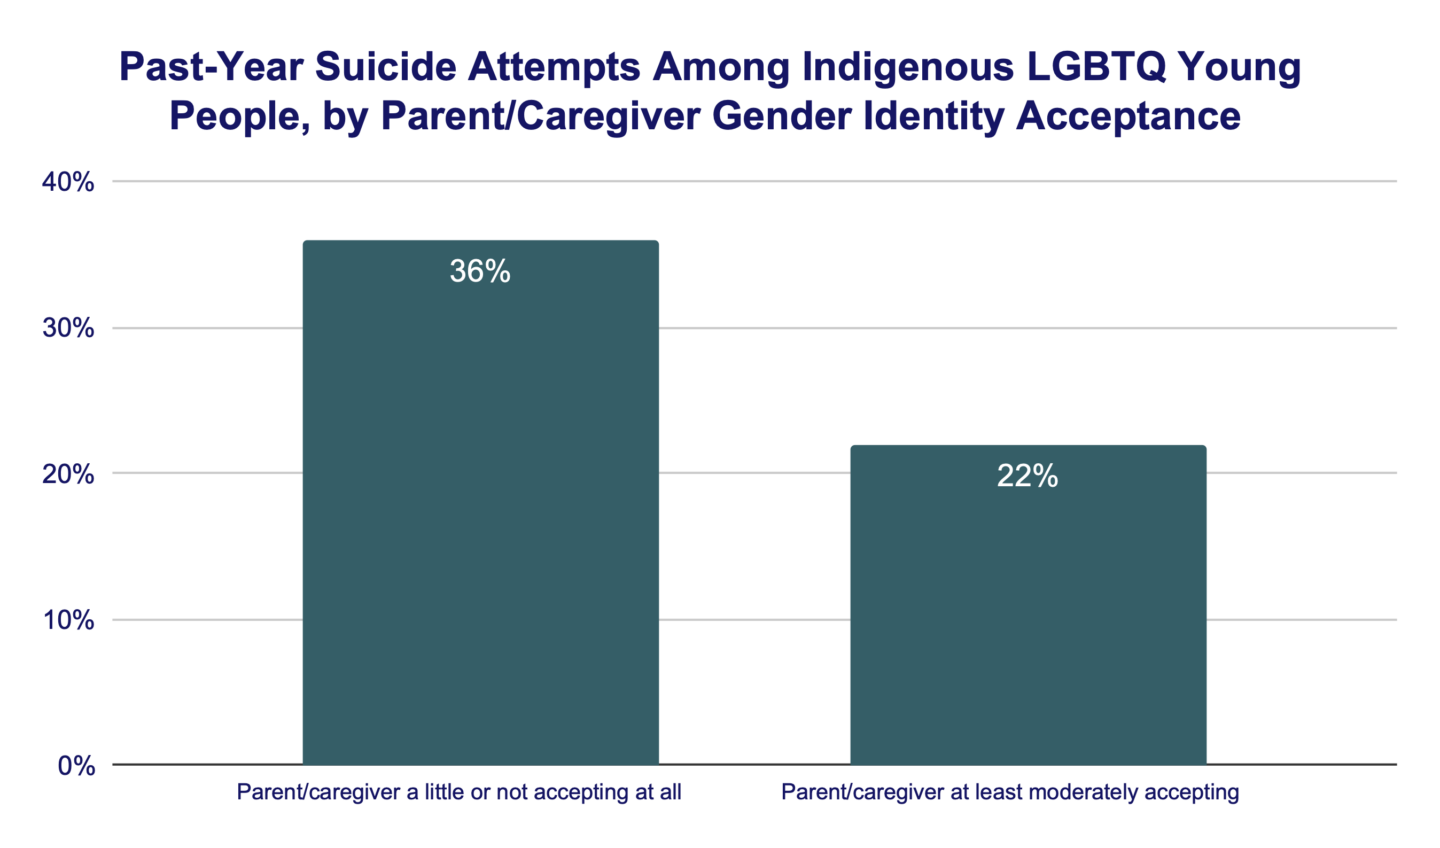 Past-Year Suicide Attempts Among Indigenous LGBTQ Young People by Parent/Caregiver Gender Identity Acceptance